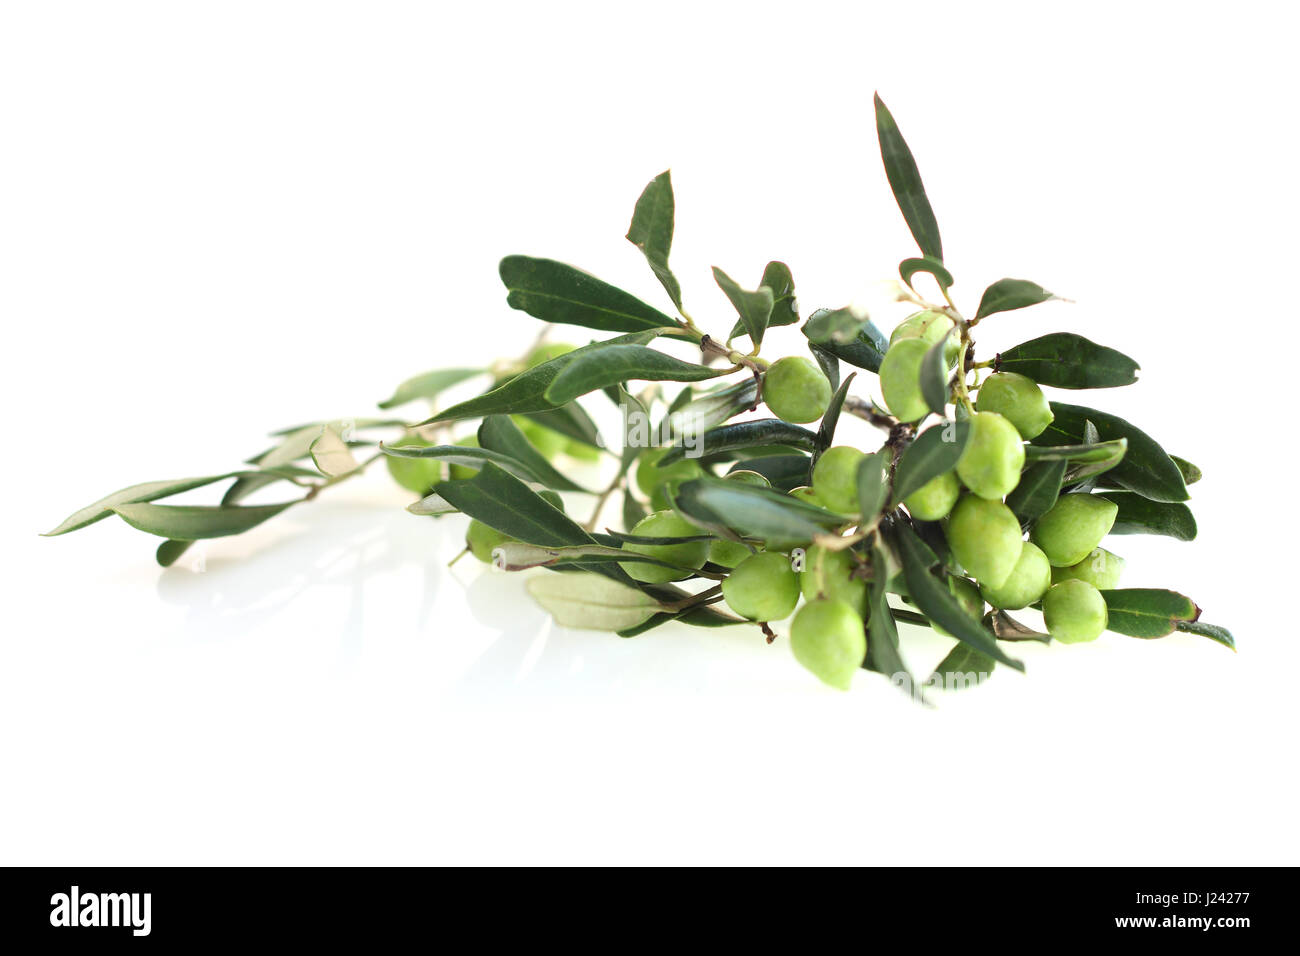 Olives on branch with leaves isolated on white background Stock Photo